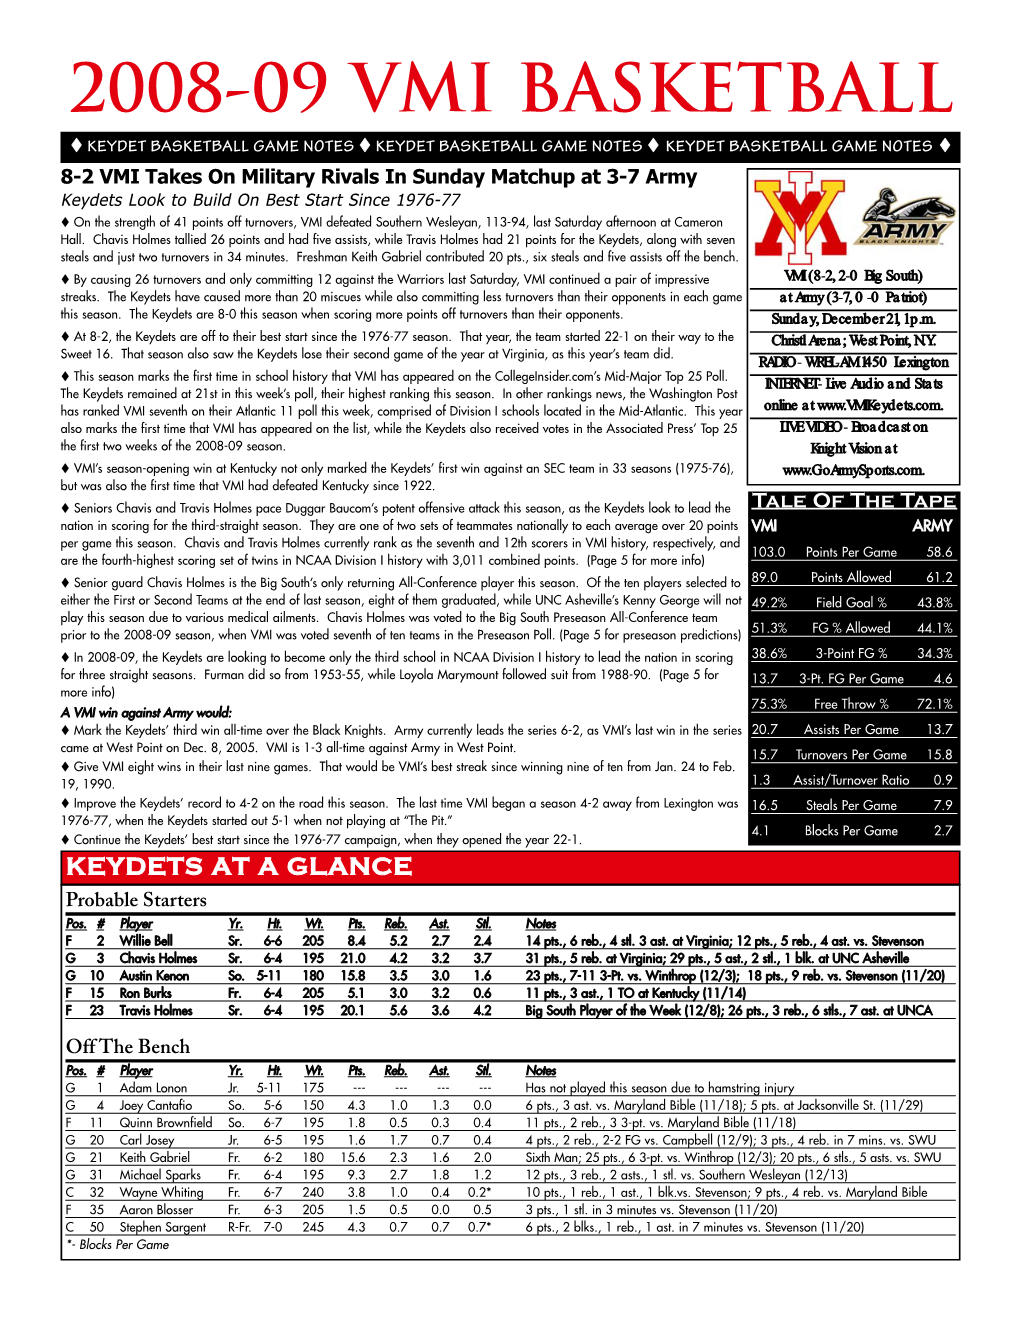 08-09 BKB Game Notes-Army.Qxp